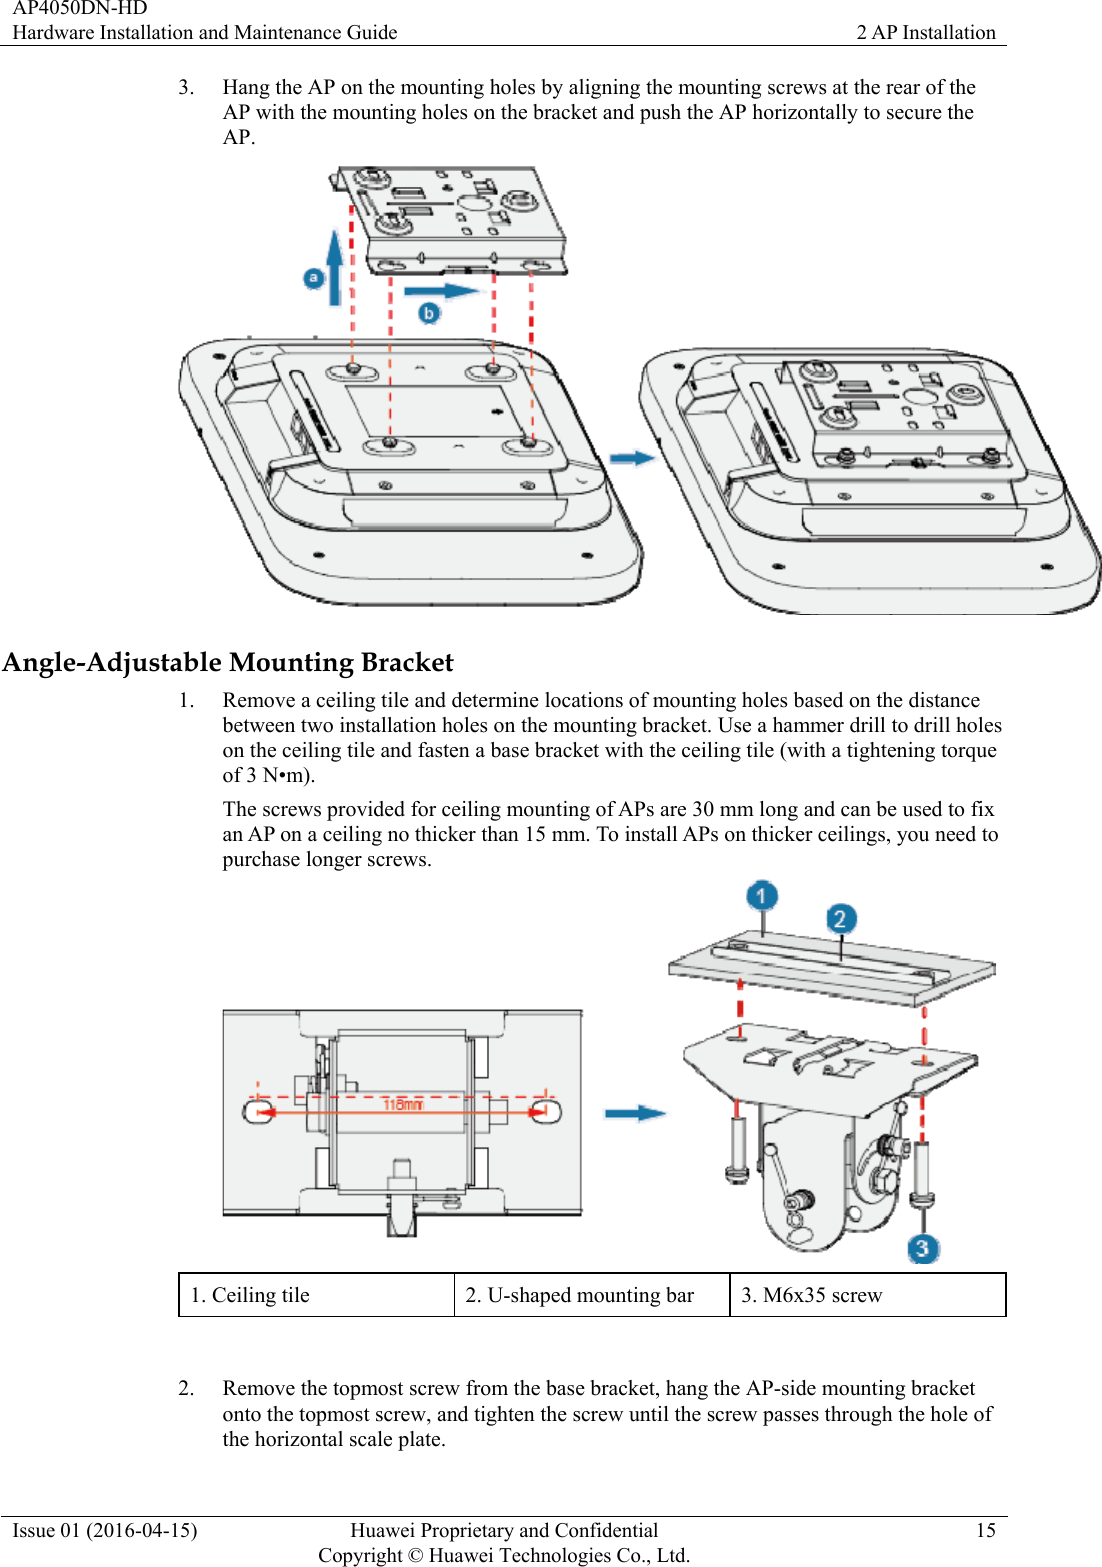 AP4050DN-HD Hardware Installation and Maintenance Guide  2 AP Installation Issue 01 (2016-04-15)  Huawei Proprietary and Confidential         Copyright © Huawei Technologies Co., Ltd.15 3. Hang the AP on the mounting holes by aligning the mounting screws at the rear of the AP with the mounting holes on the bracket and push the AP horizontally to secure the AP.  Angle-Adjustable Mounting Bracket 1. Remove a ceiling tile and determine locations of mounting holes based on the distance between two installation holes on the mounting bracket. Use a hammer drill to drill holes on the ceiling tile and fasten a base bracket with the ceiling tile (with a tightening torque of 3 N•m). The screws provided for ceiling mounting of APs are 30 mm long and can be used to fix an AP on a ceiling no thicker than 15 mm. To install APs on thicker ceilings, you need to purchase longer screws.    1. Ceiling tile  2. U-shaped mounting bar  3. M6x35 screw  2. Remove the topmost screw from the base bracket, hang the AP-side mounting bracket onto the topmost screw, and tighten the screw until the screw passes through the hole of the horizontal scale plate. 